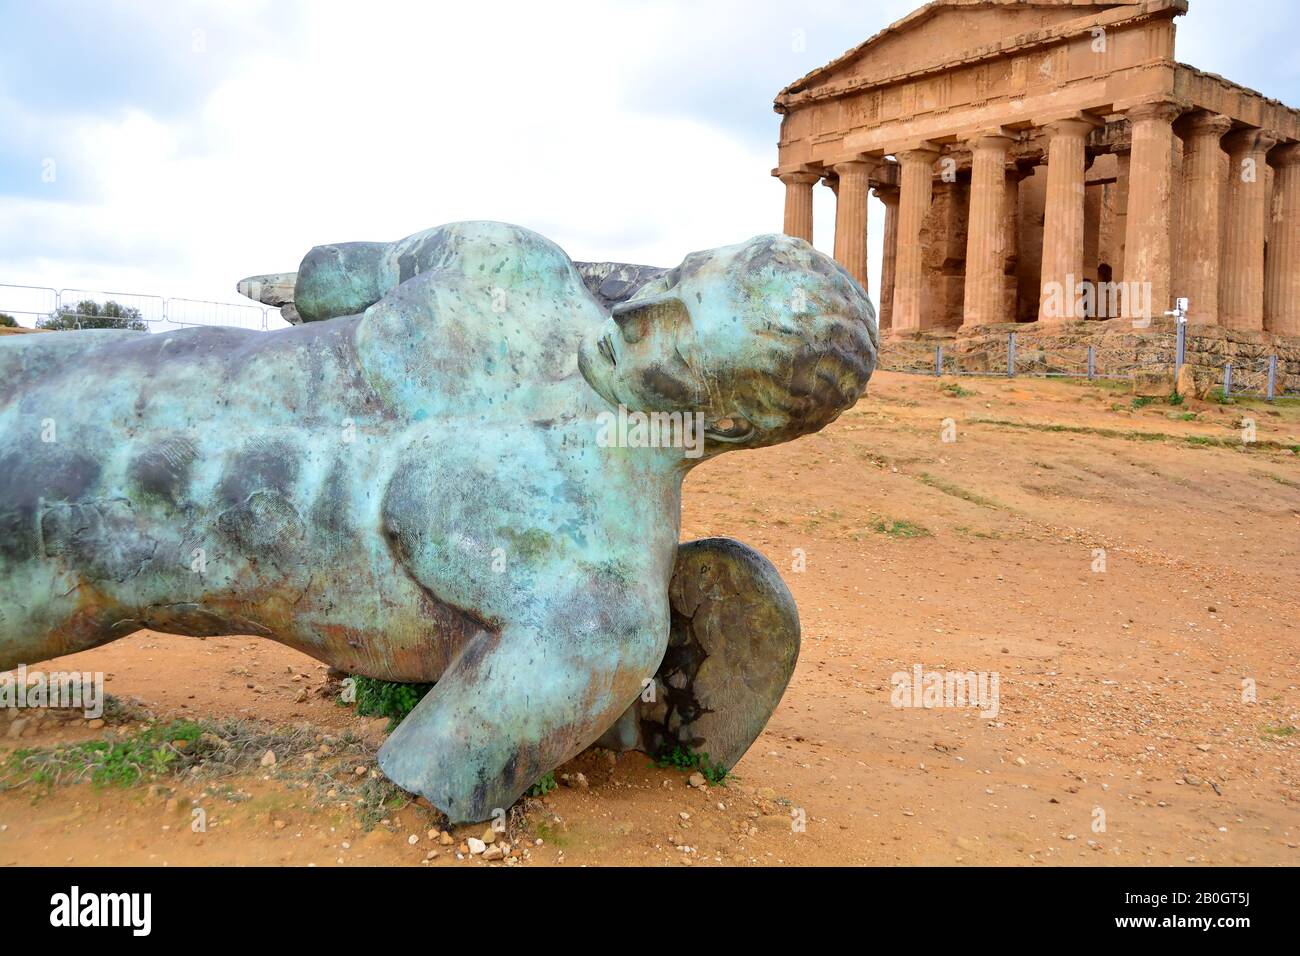 Statue of fallen Icarus in bronze in front of the 2,400 year old Temple of Concordia, one of the best preserved Ancient Greek Temples at Agrigento, Th Stock Photo